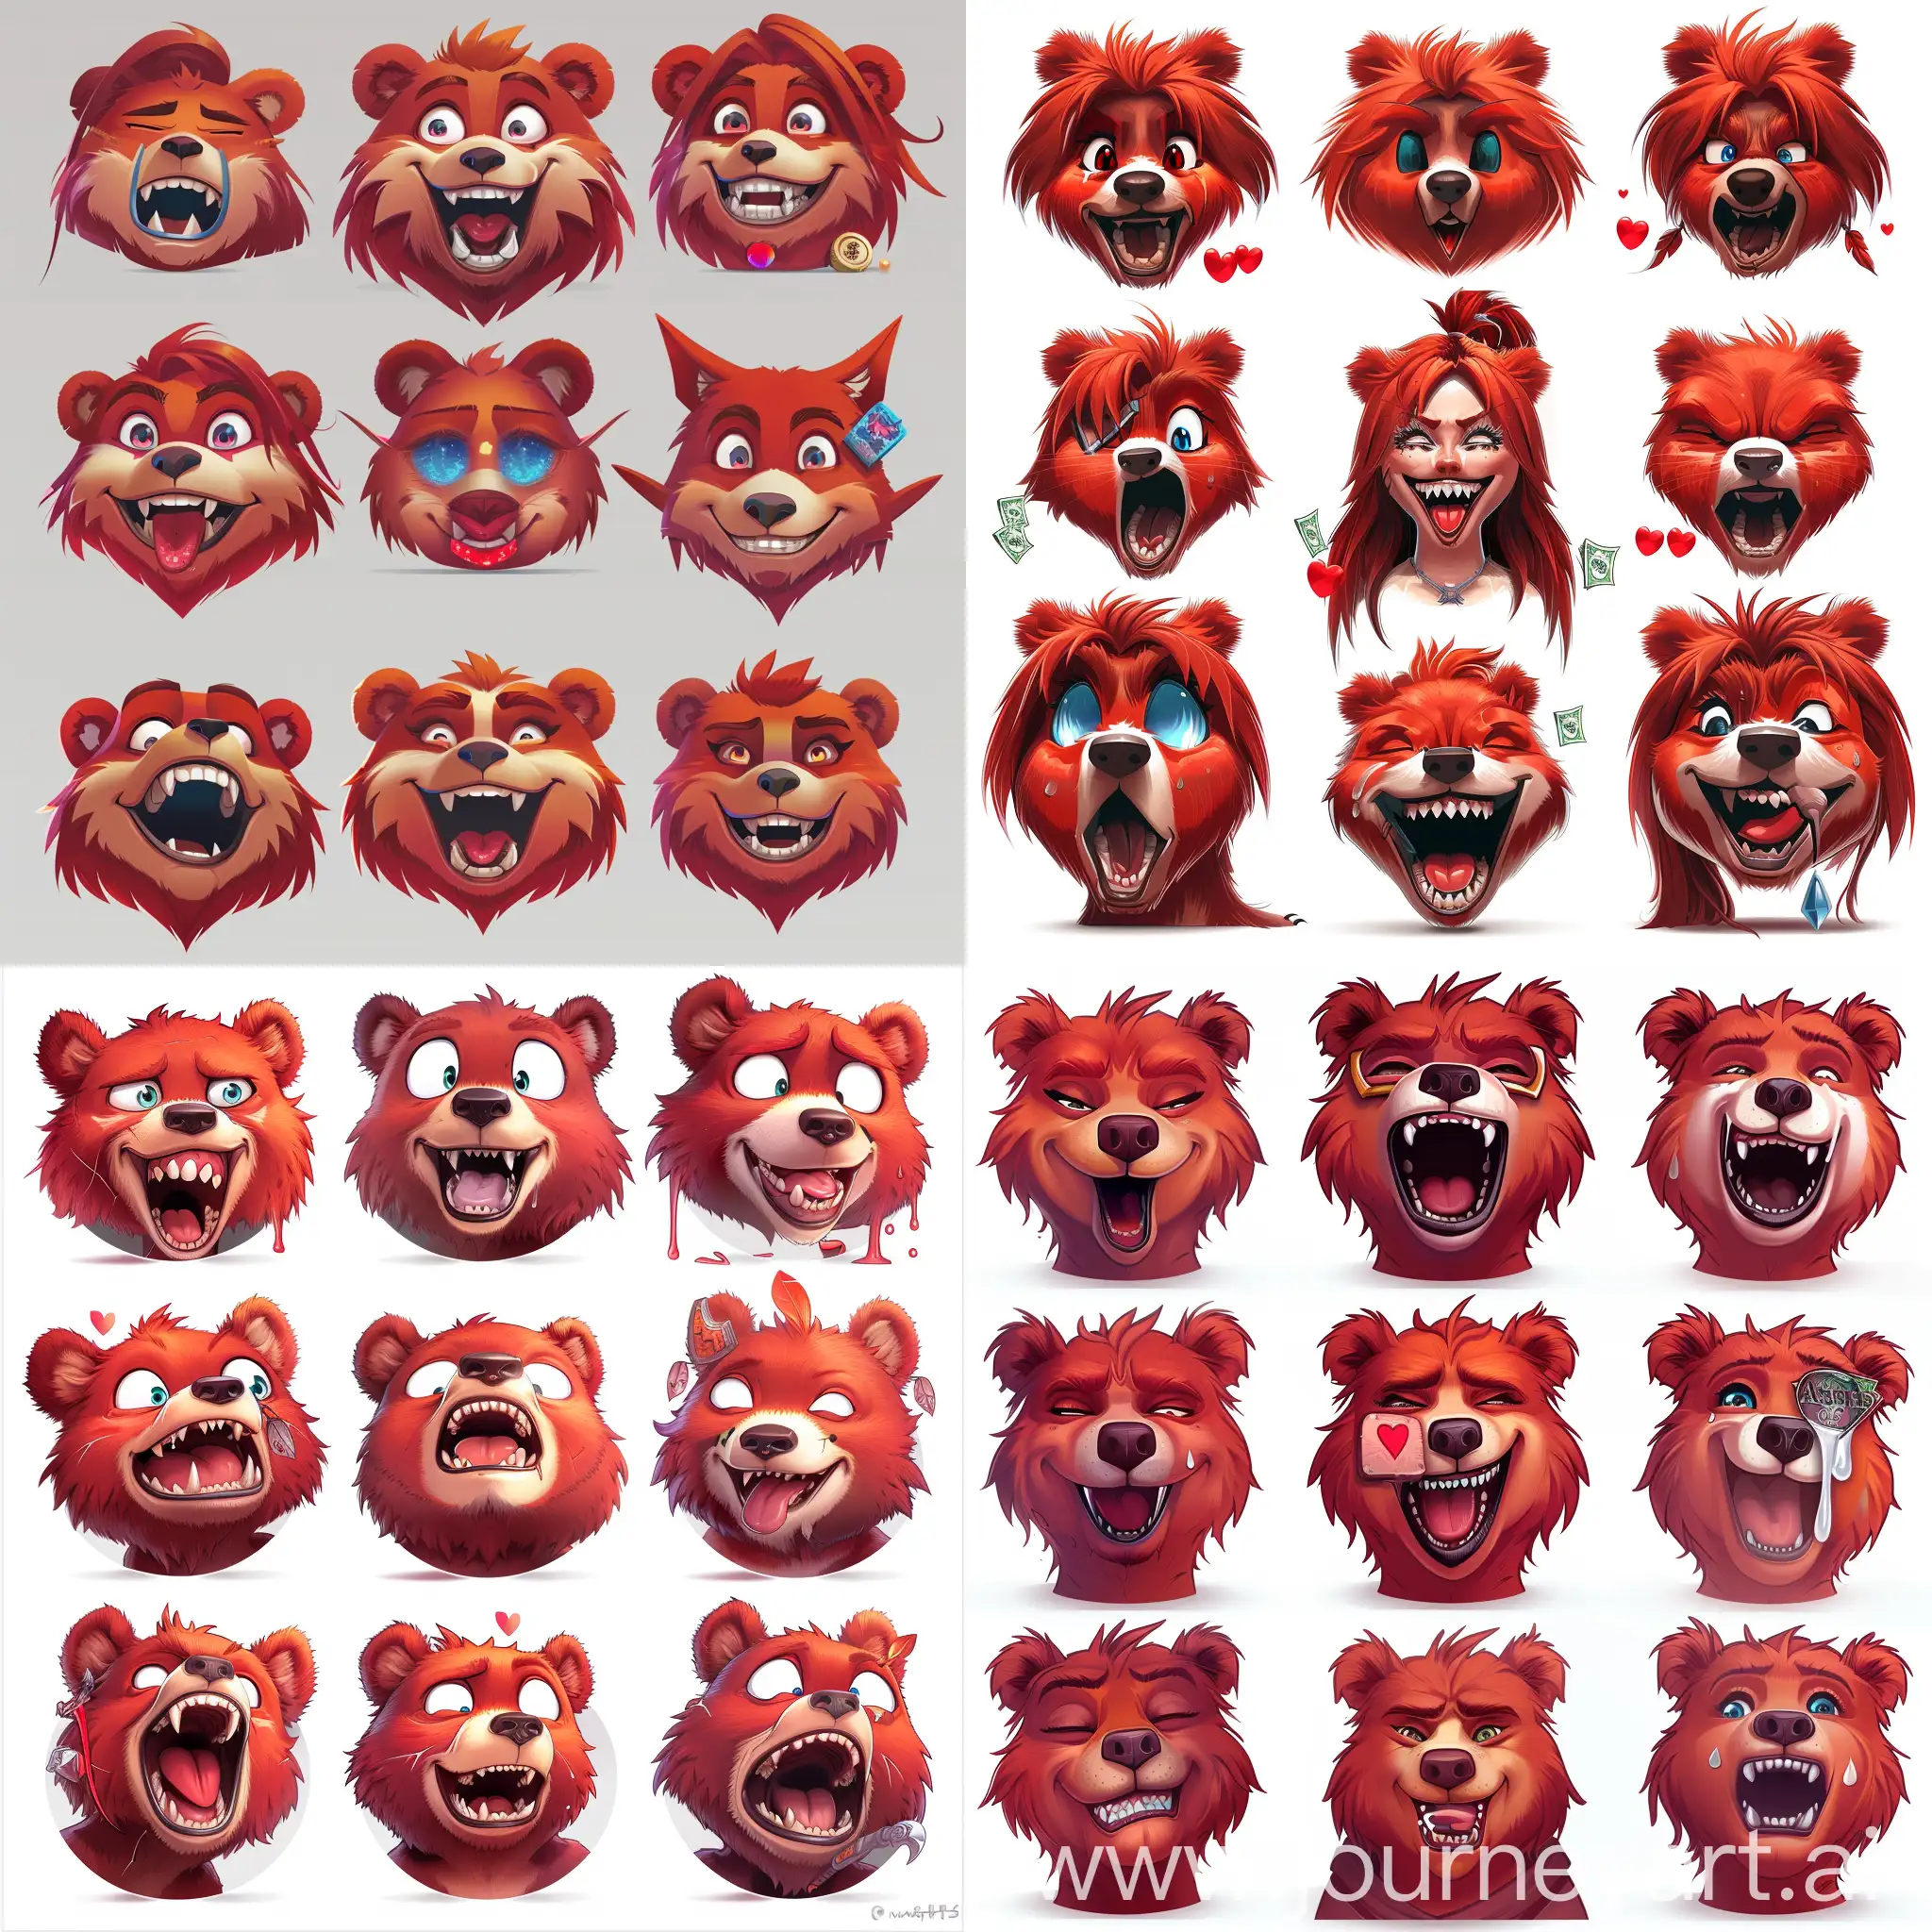 Female-Bear-Druid-in-World-of-Warcraft-with-Red-Fur-and-Twitch-Emoji-Expressions